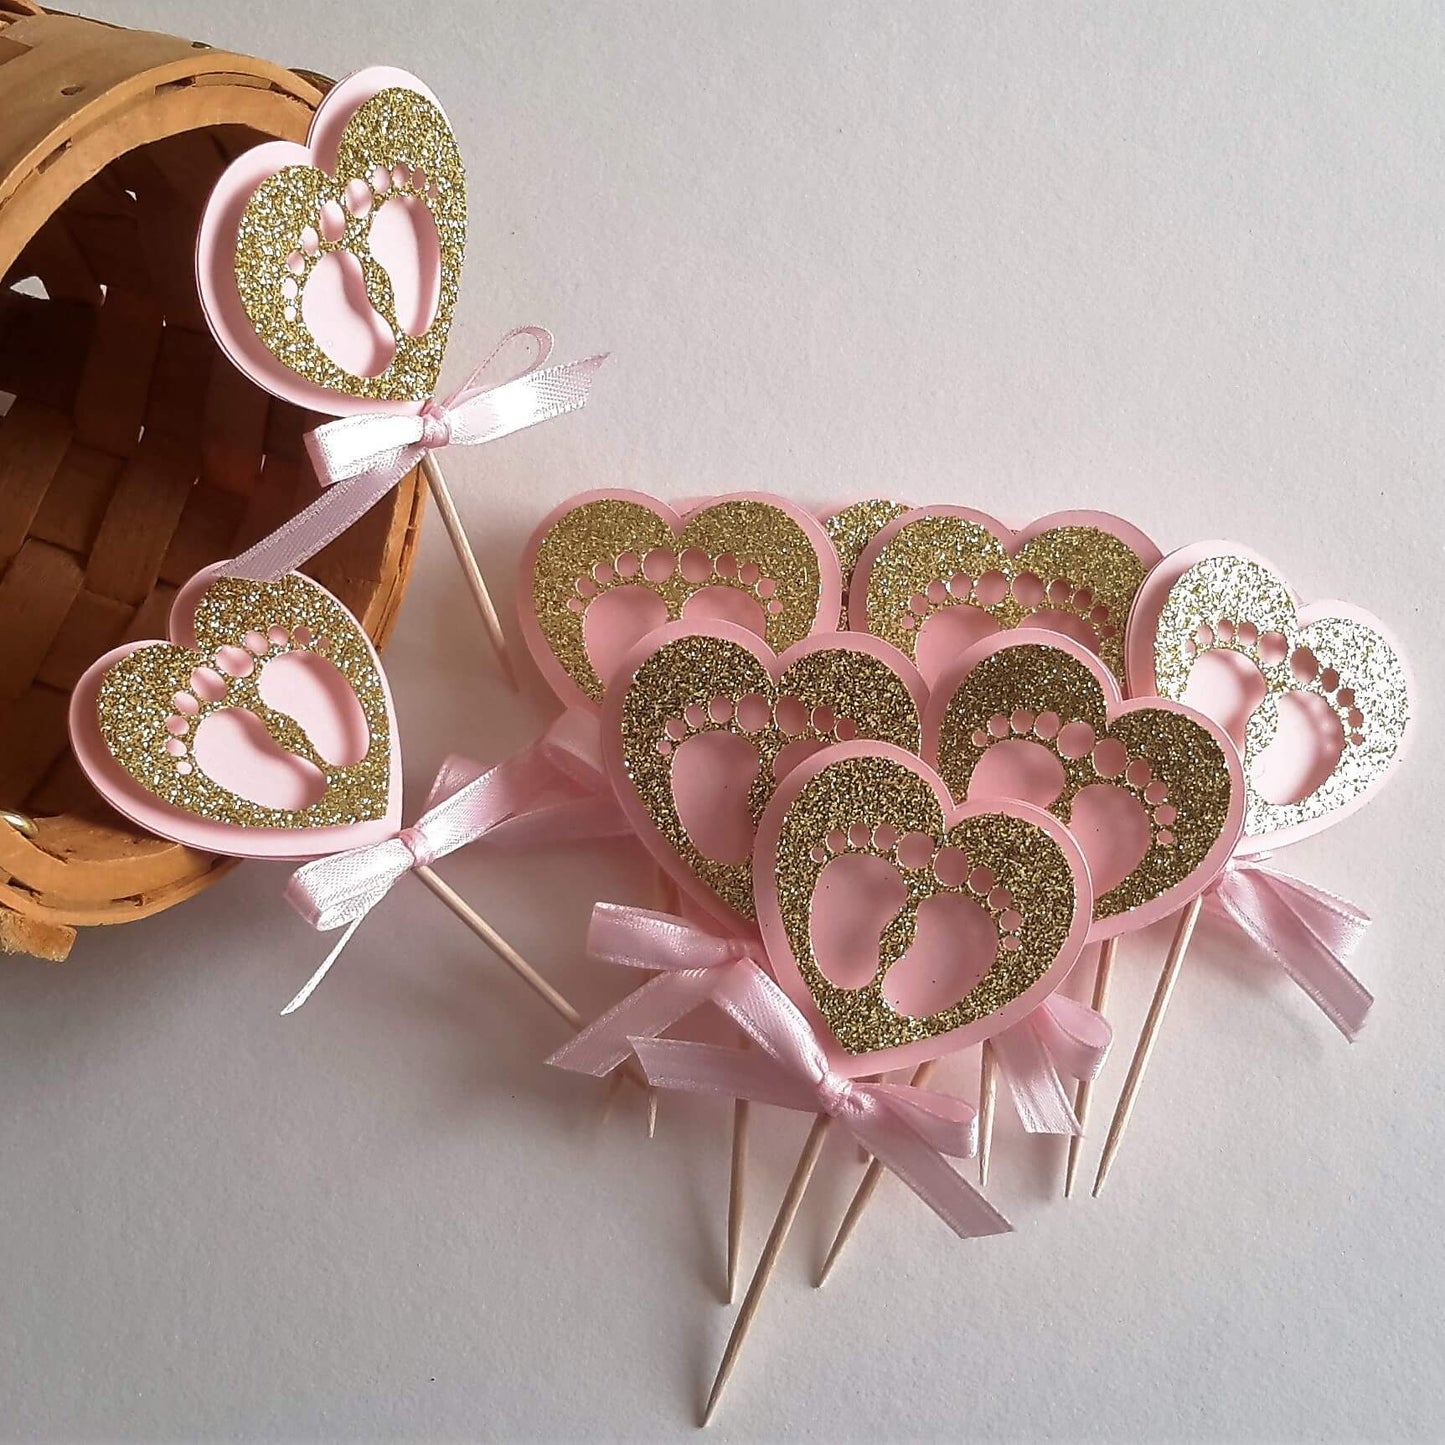 Adriana Ortiz Designs Cupcake toppers Gold Heart Cupcake Toppers Baby Shower